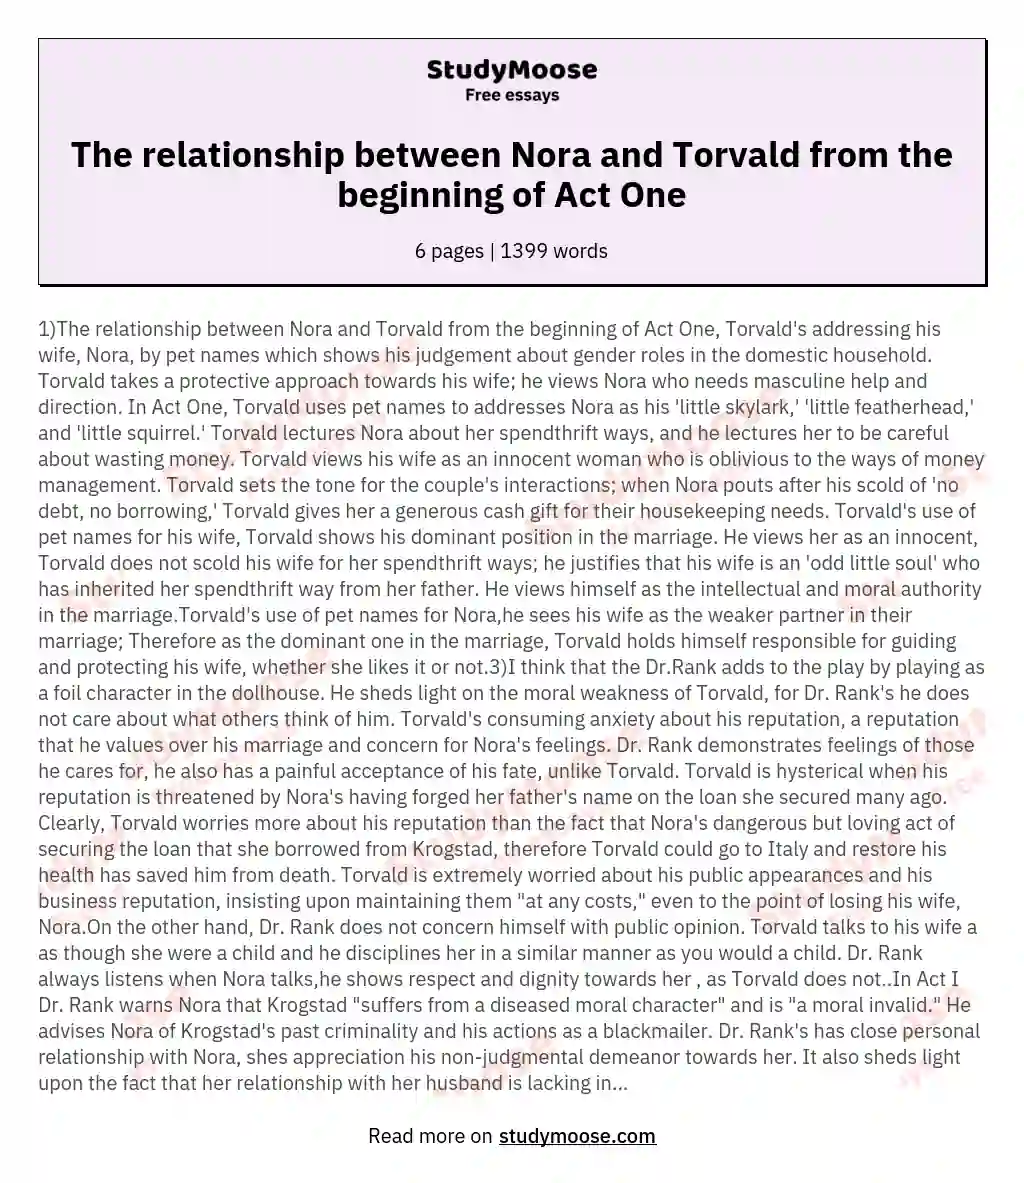 The relationship between Nora and Torvald from the beginning of Act One